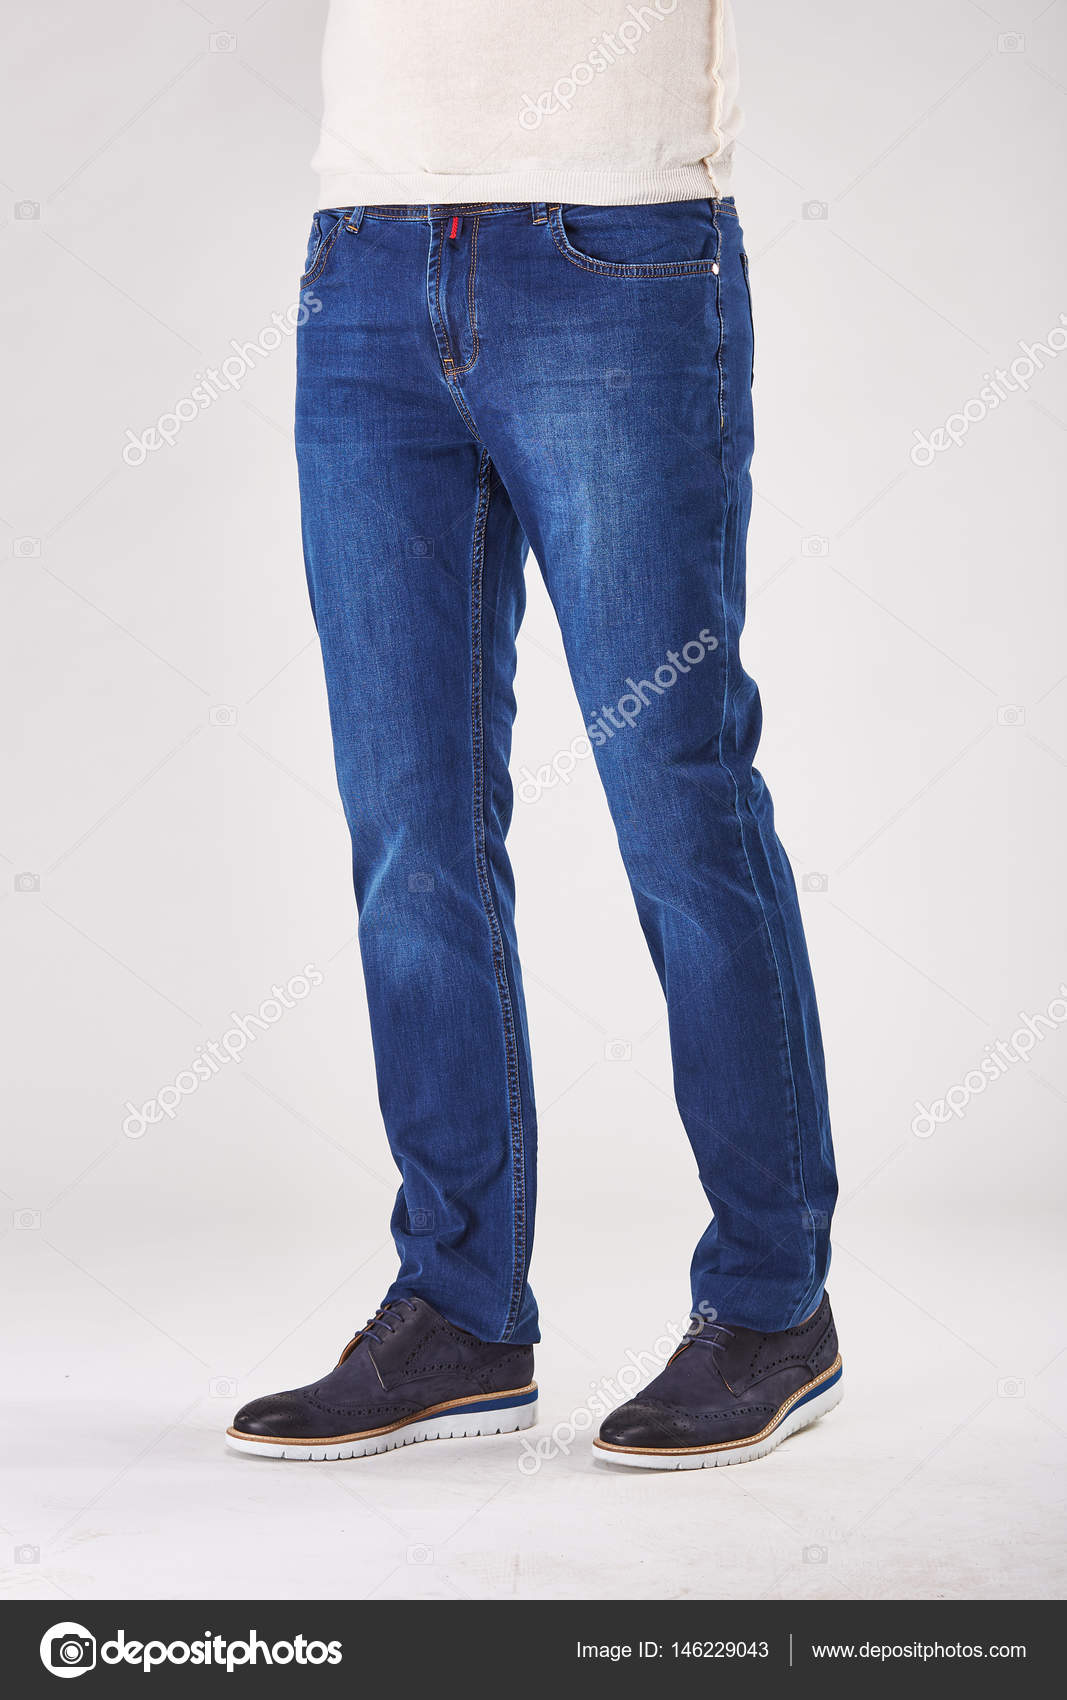 black shoes with blue jeans